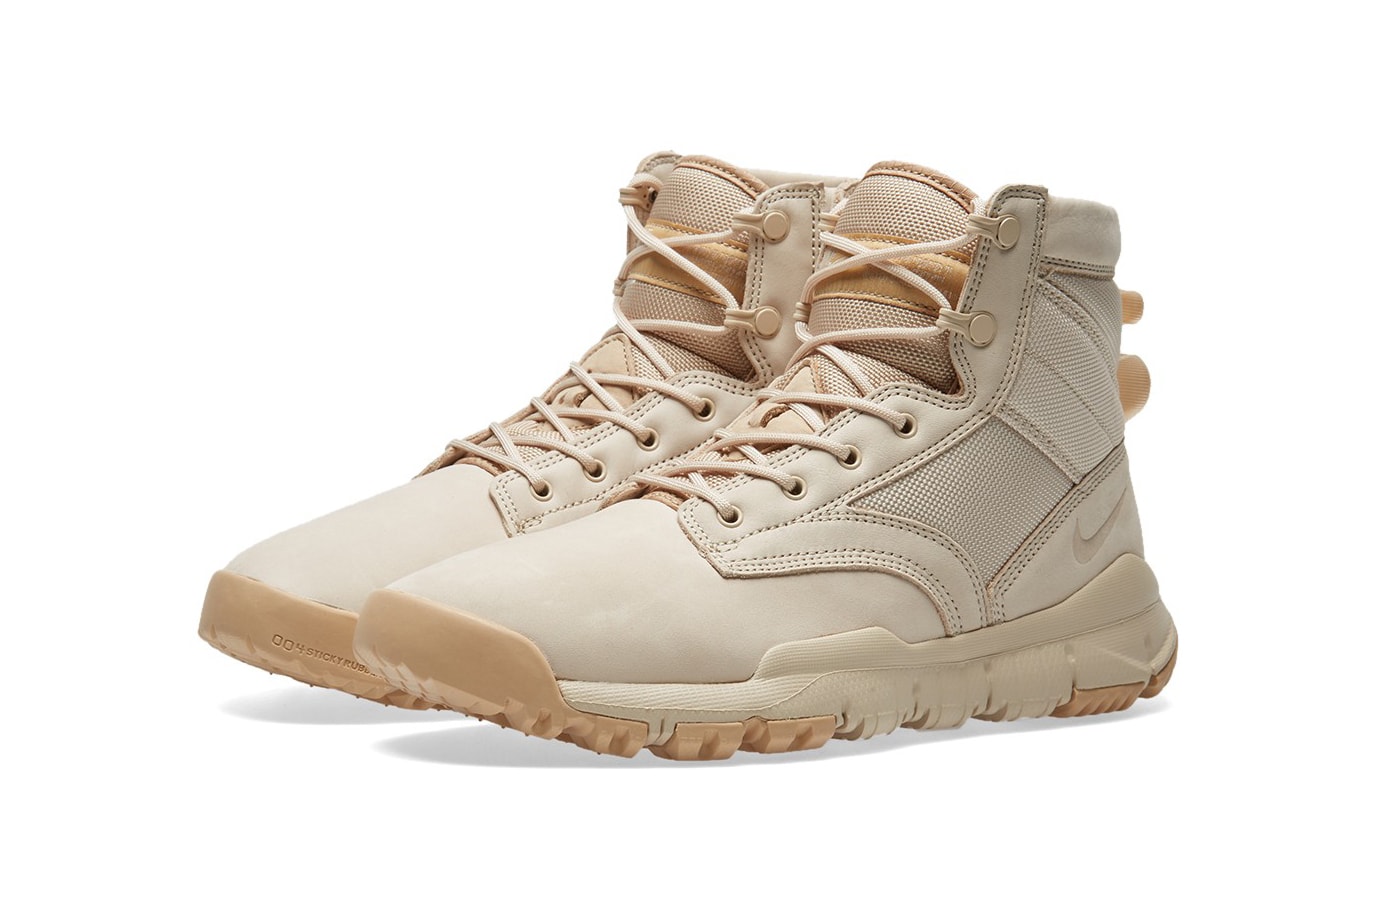 Nike SFB 6 Inch Leather NSW Oatmeal Linen